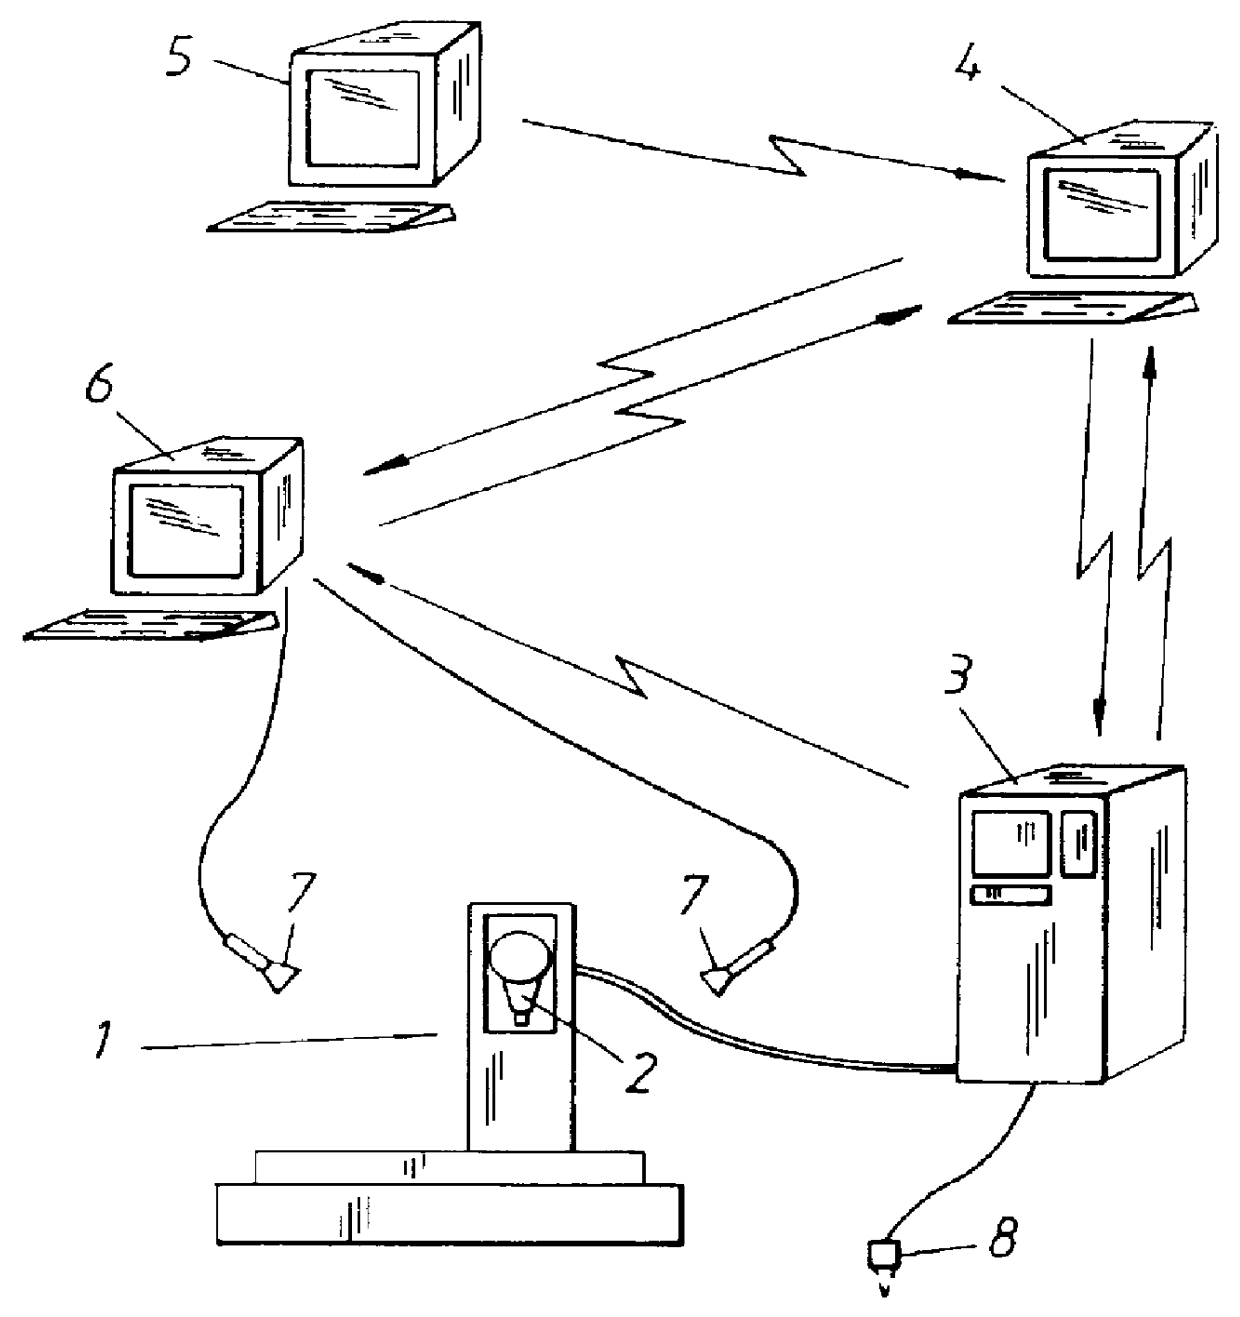 Production positioning system